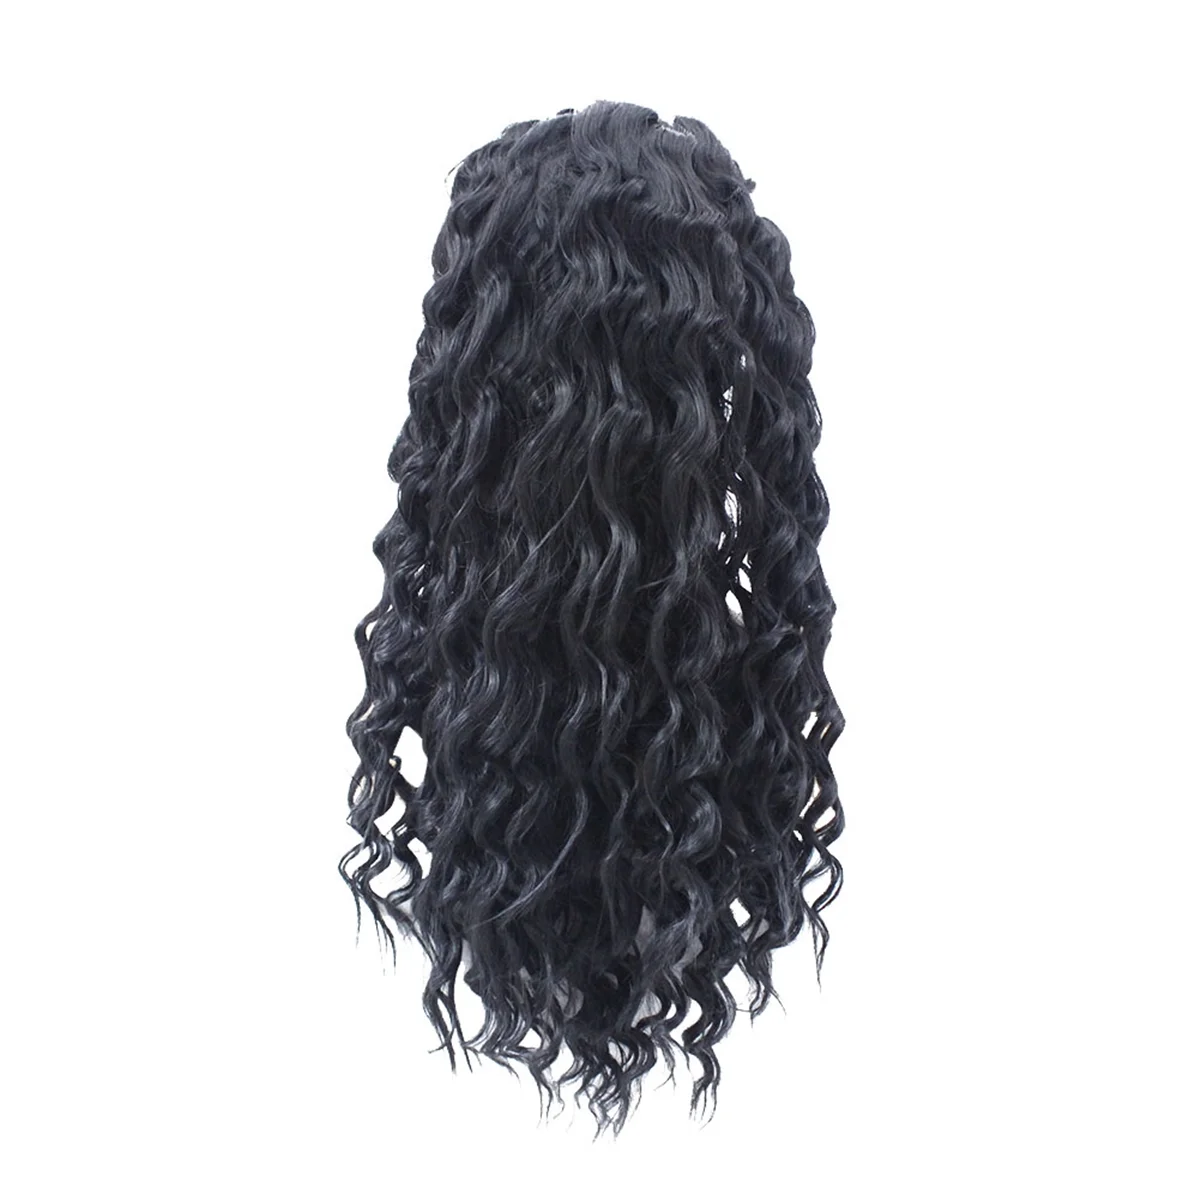 

14 Inches Front Lace Curly Fringe Wig Curly Hair Wigs Brazilian Remy- Curly Human-Hair Wigs for Women